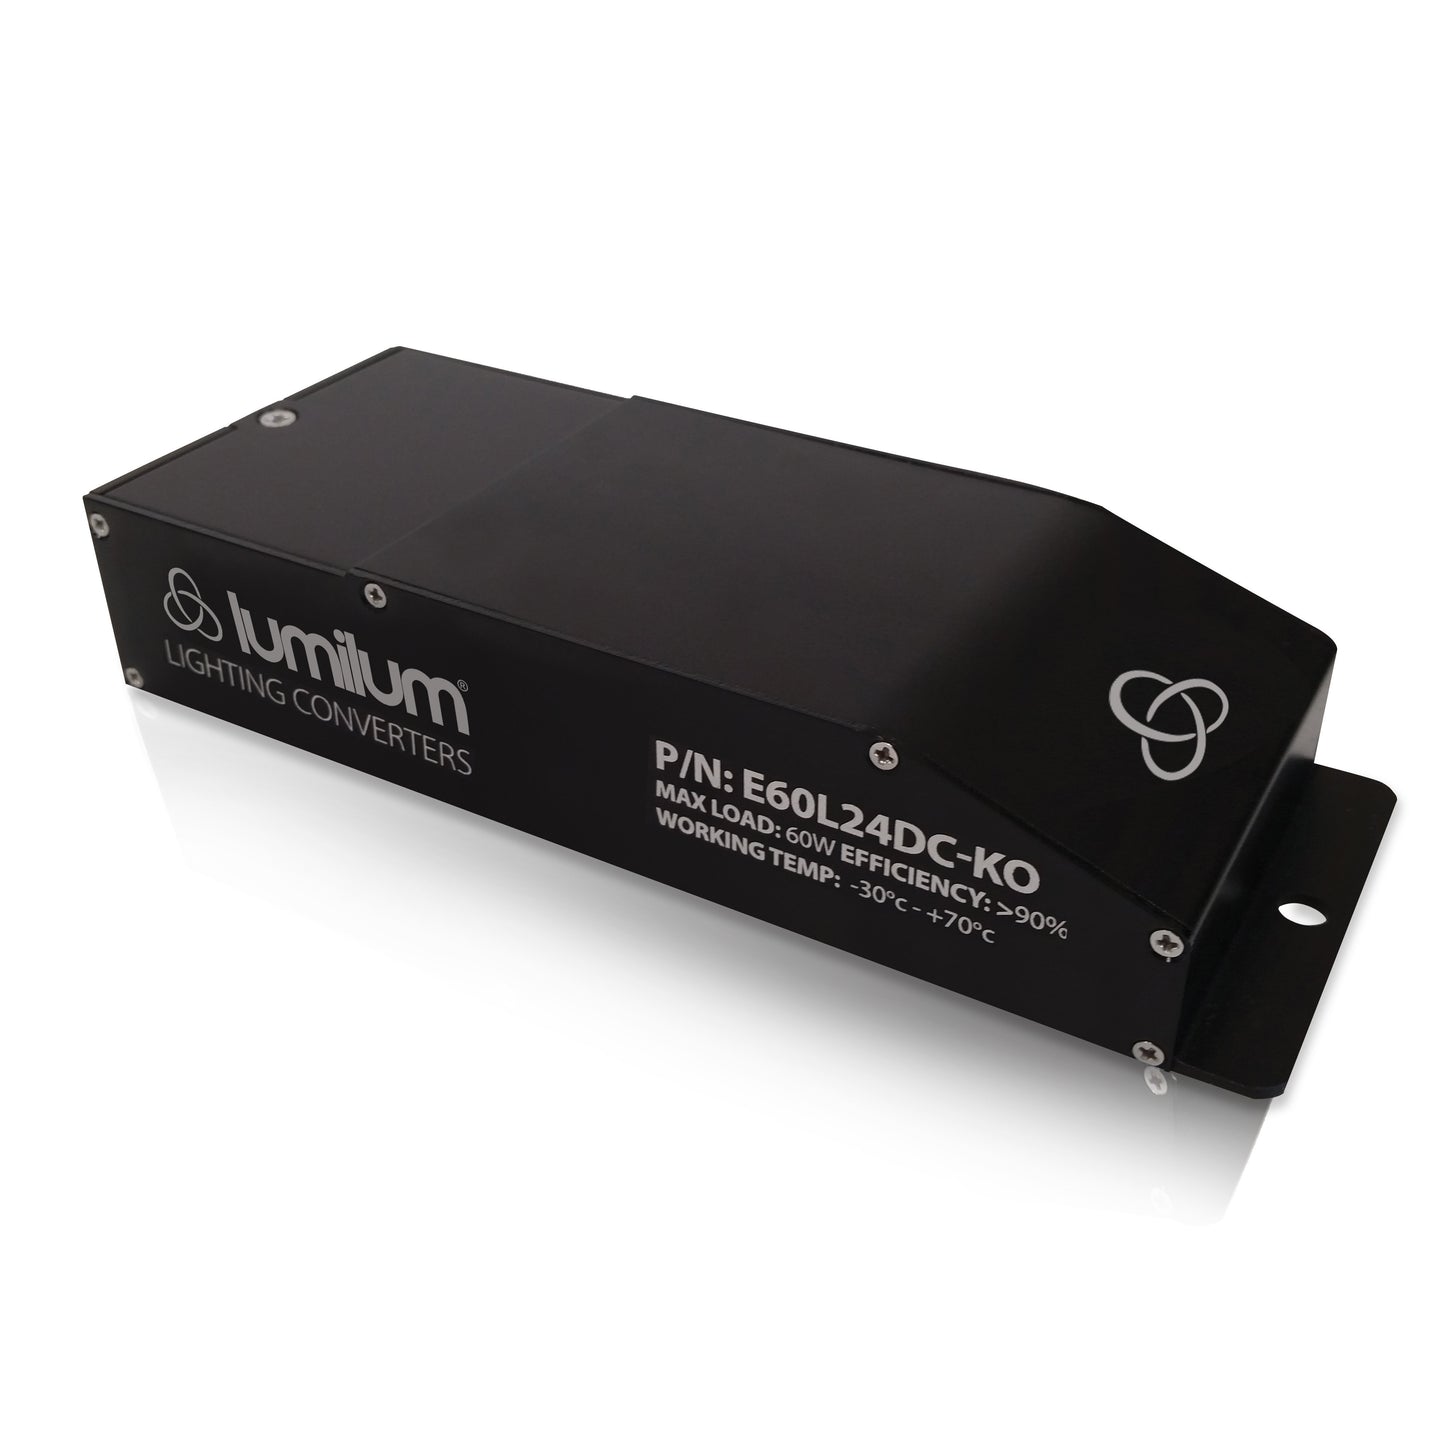 Load image into Gallery viewer, lumilum brand black 60W led transformer driver with product information marking
